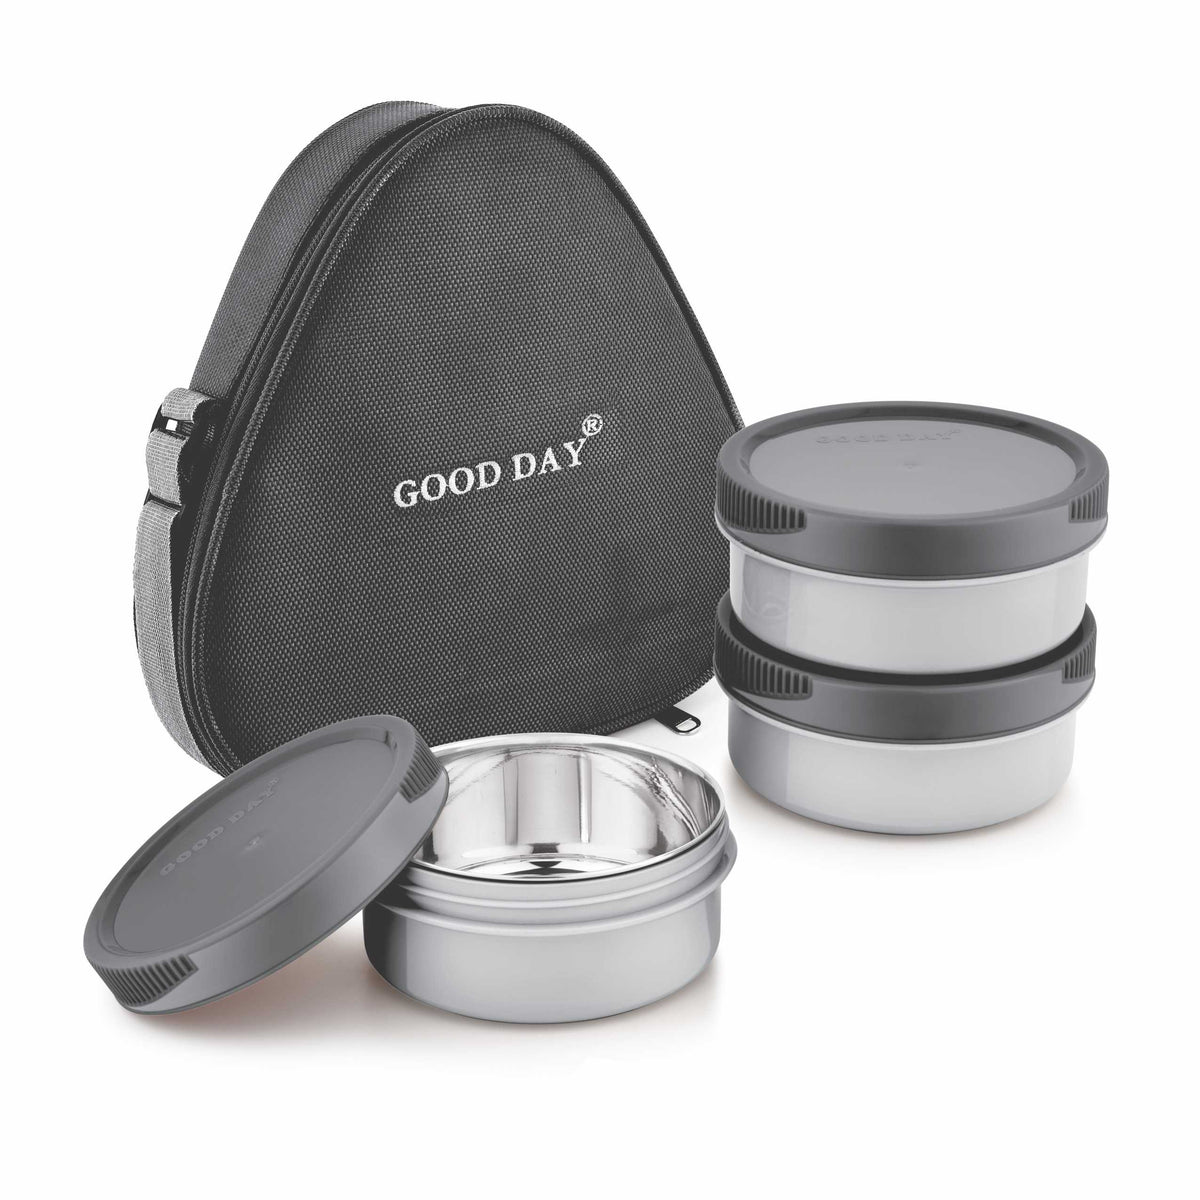 Easy Meal Trio Steel Lunch Box